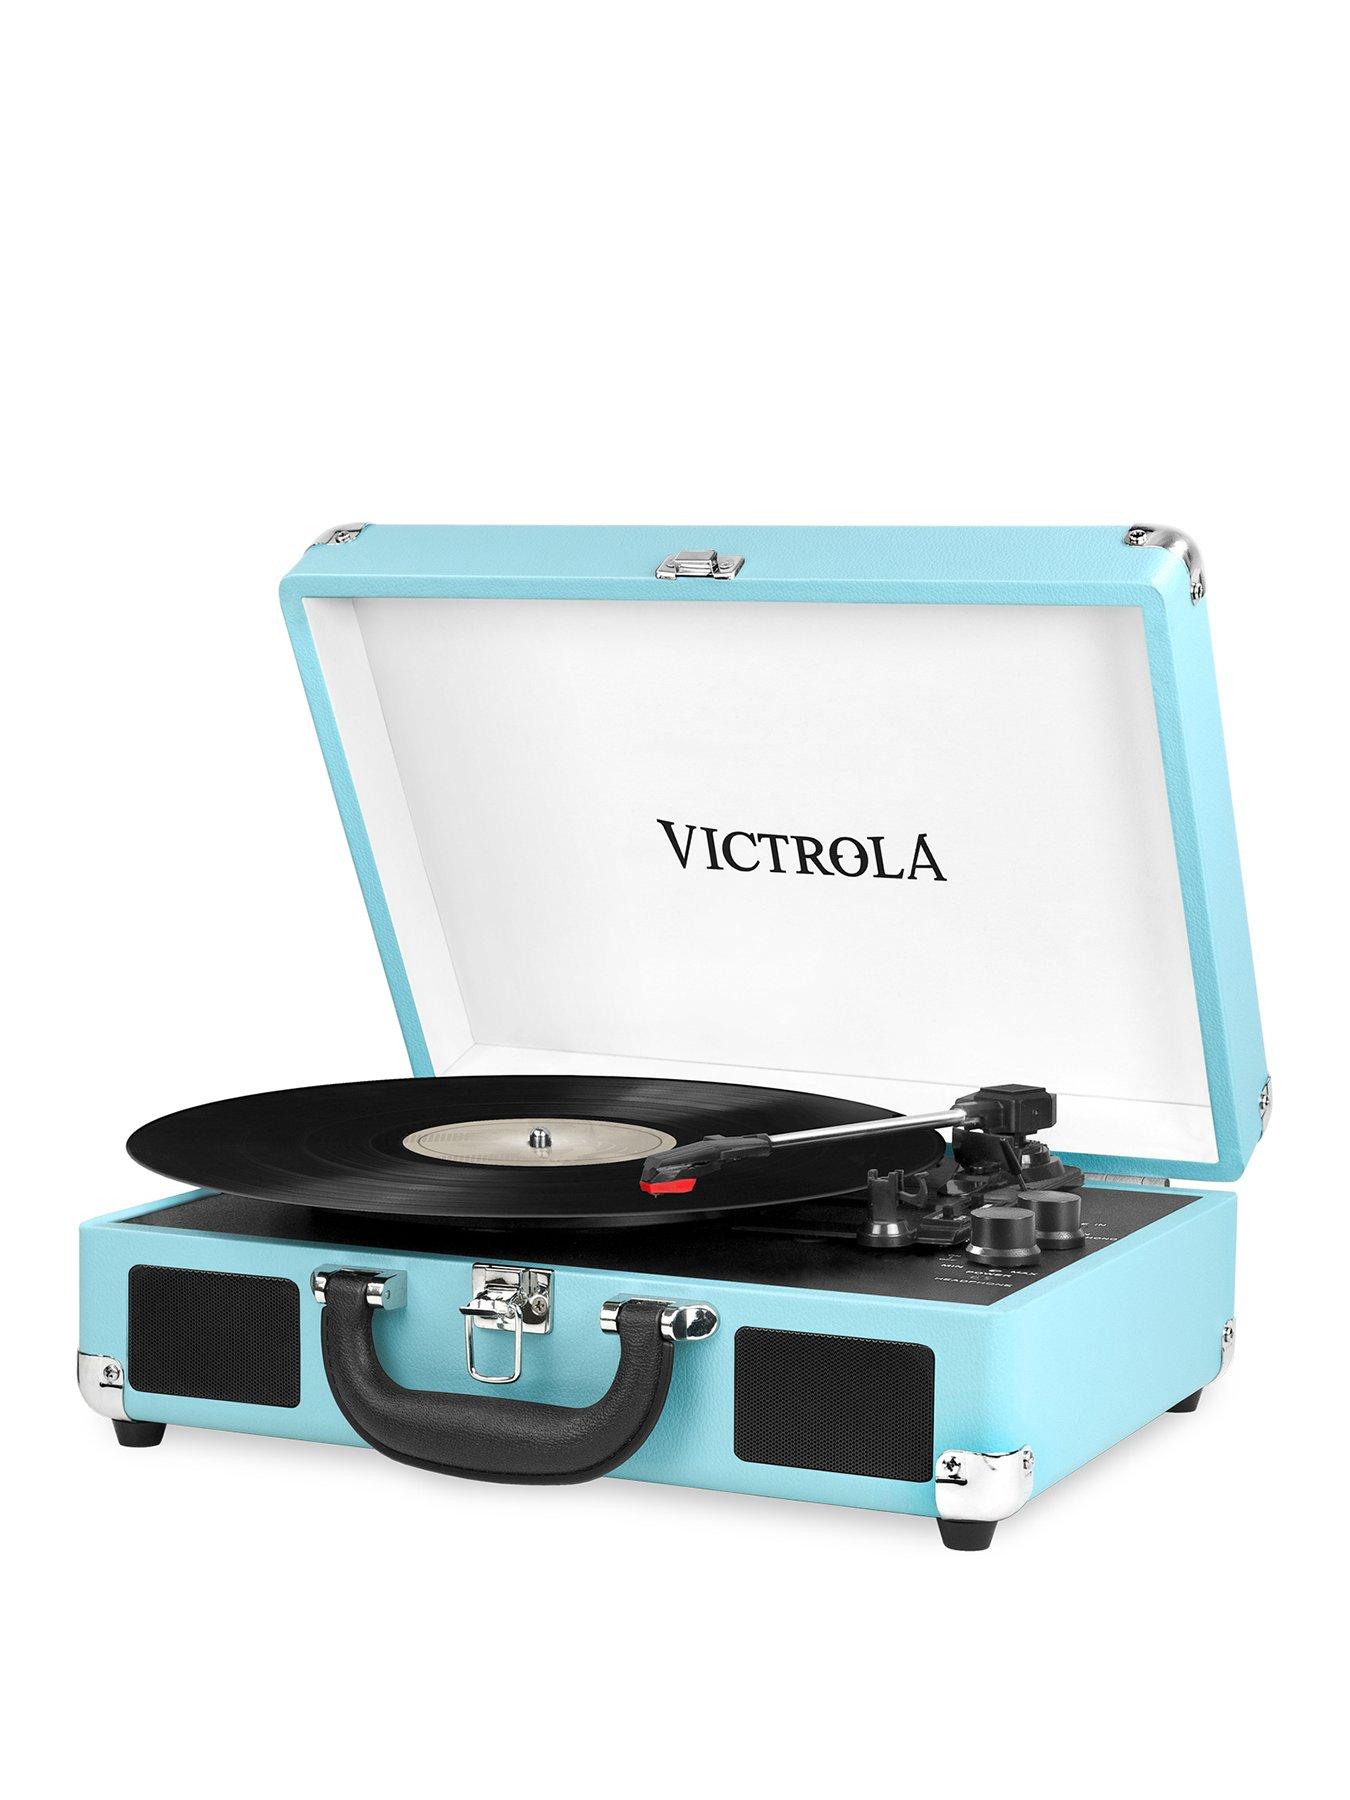 Victrola Journey Portable Record Player (Turquoise) - Bluetooth 5.0  Suitcase Turntable with Built-In Stereo Speakers